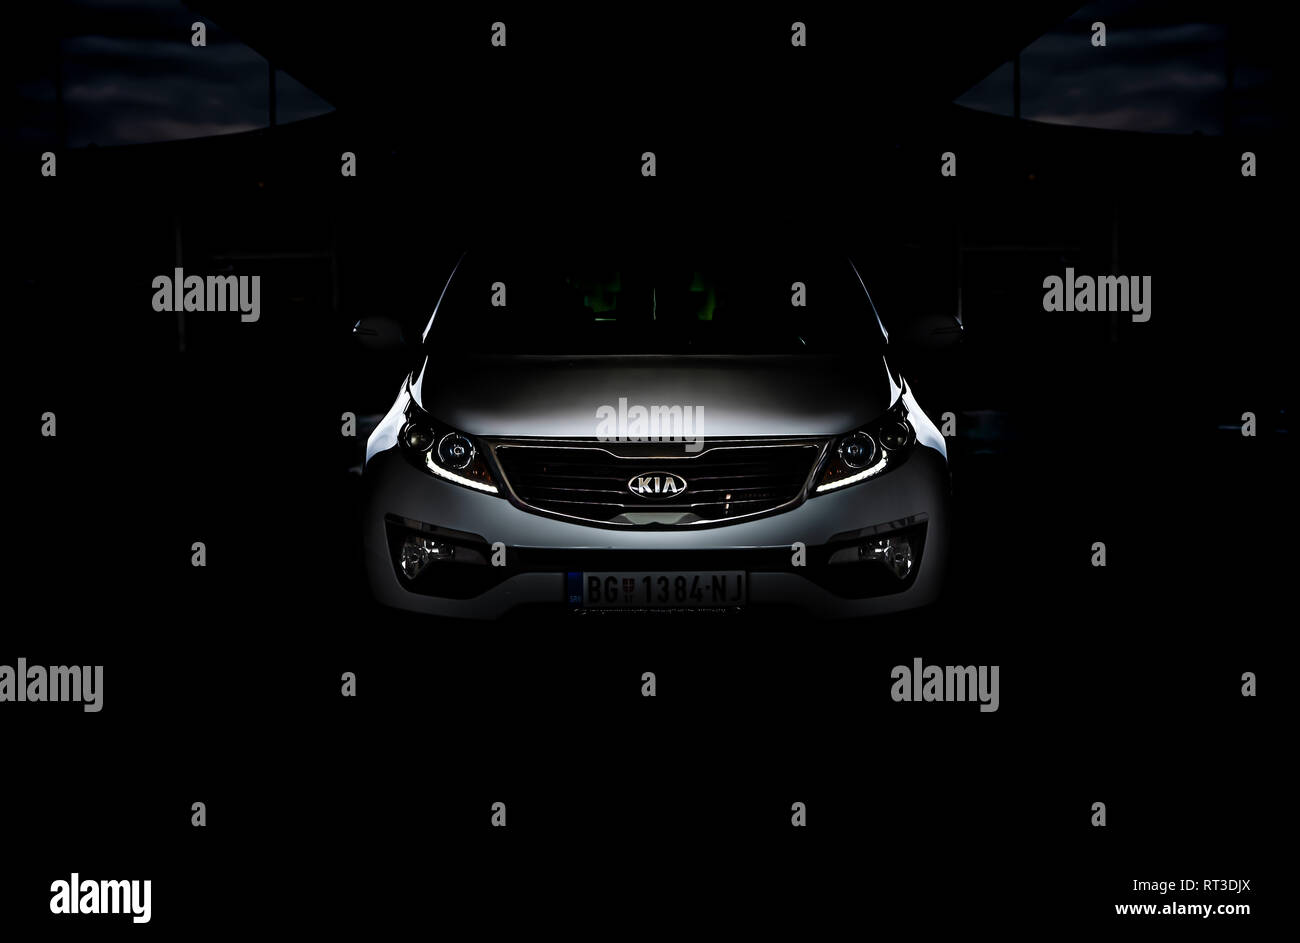 Photo of SUV Kia Sportage 2.0 CRDI awd or 4x4, a dark picture, so that you can only see the contours of the car design. It looks like beast in cave. Stock Photo